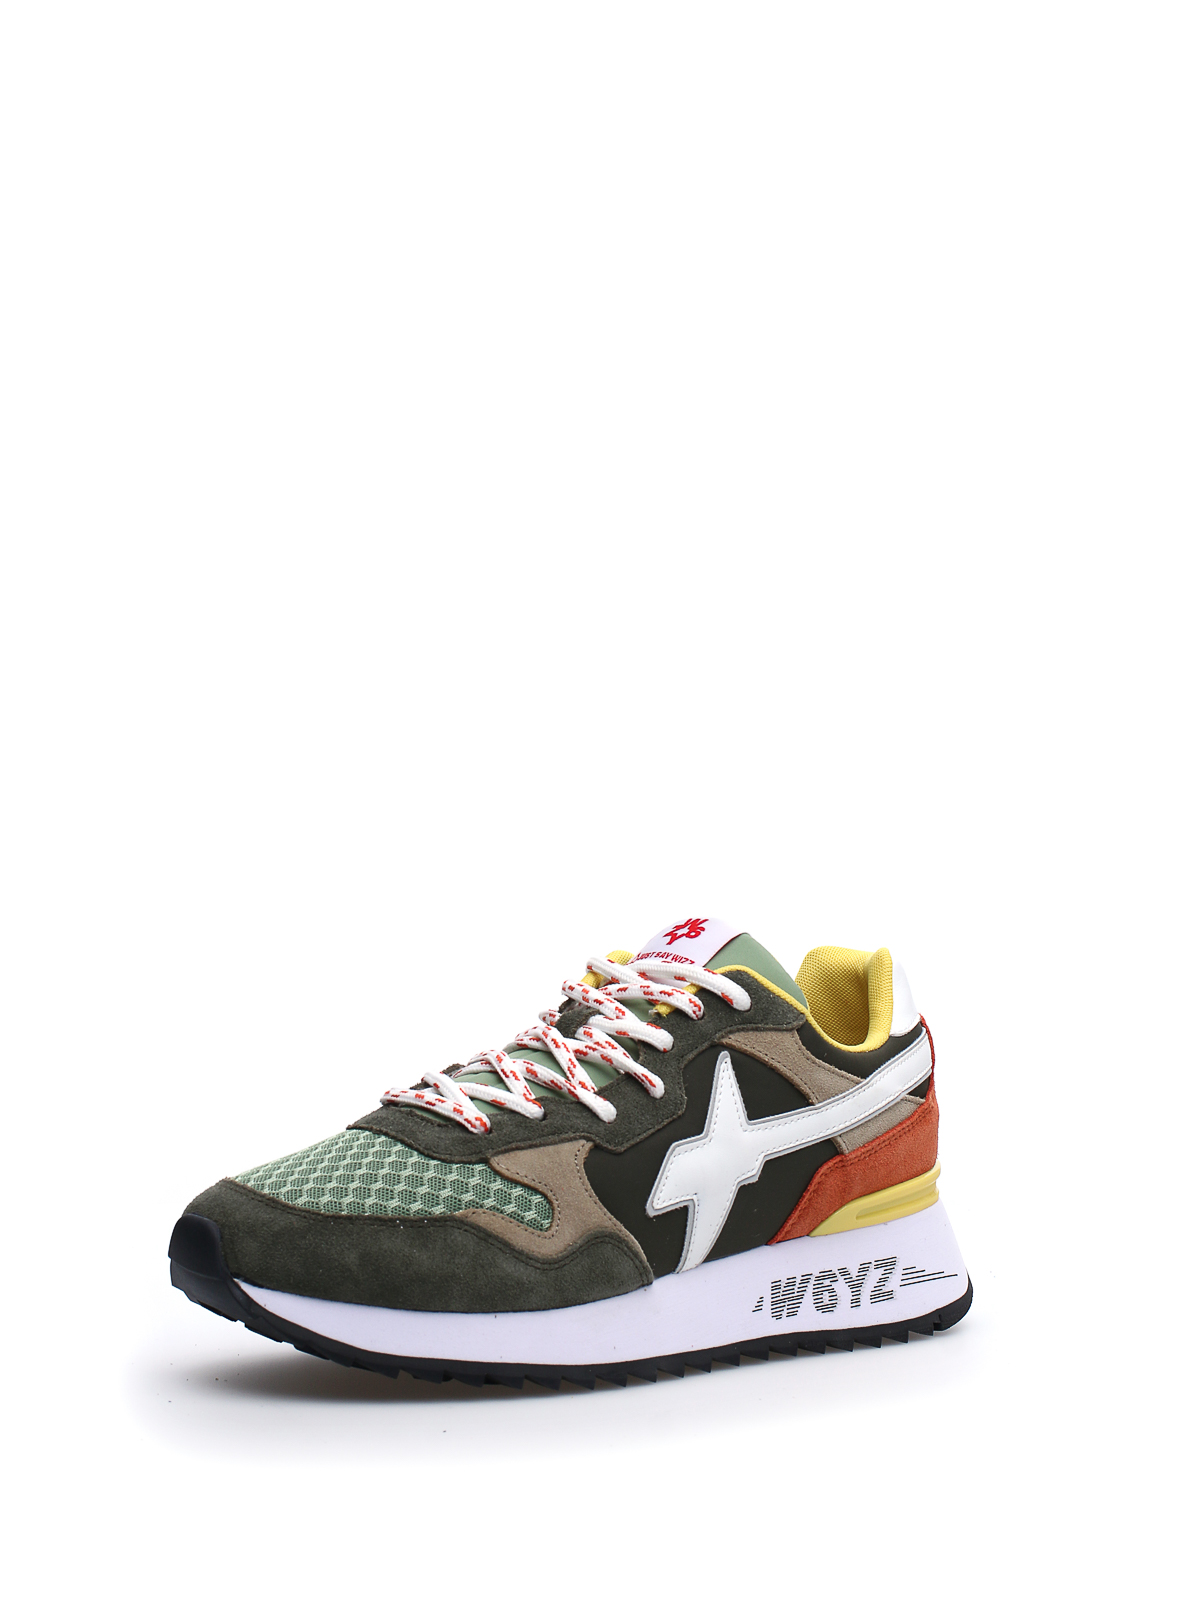 Trainers W6YZ - Yak m - 2015185152F39SOLE | Shop online at THEBS